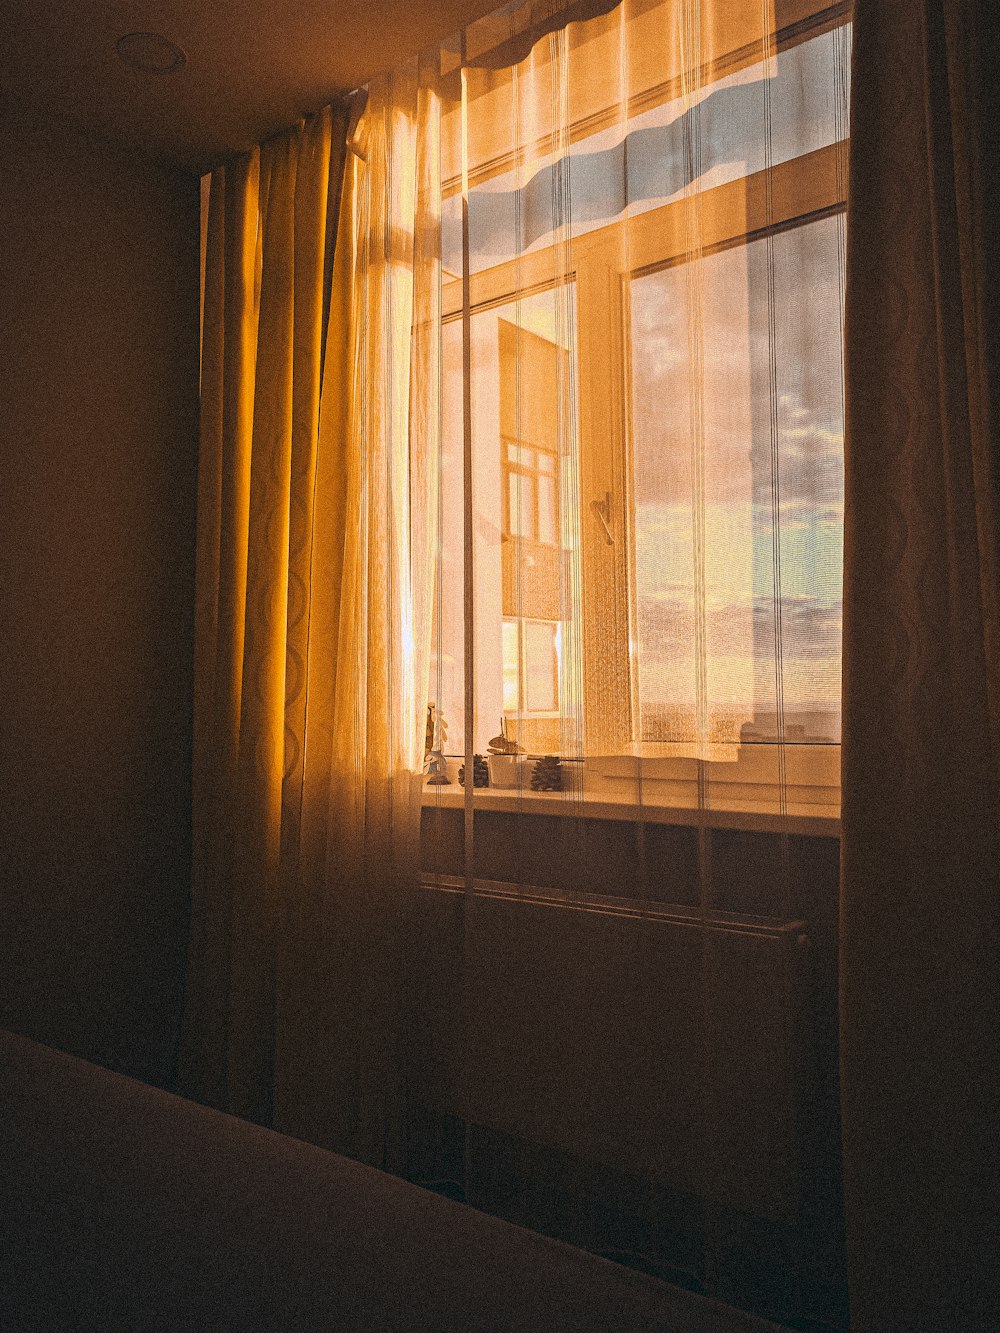 the sun is shining through the curtains of a window